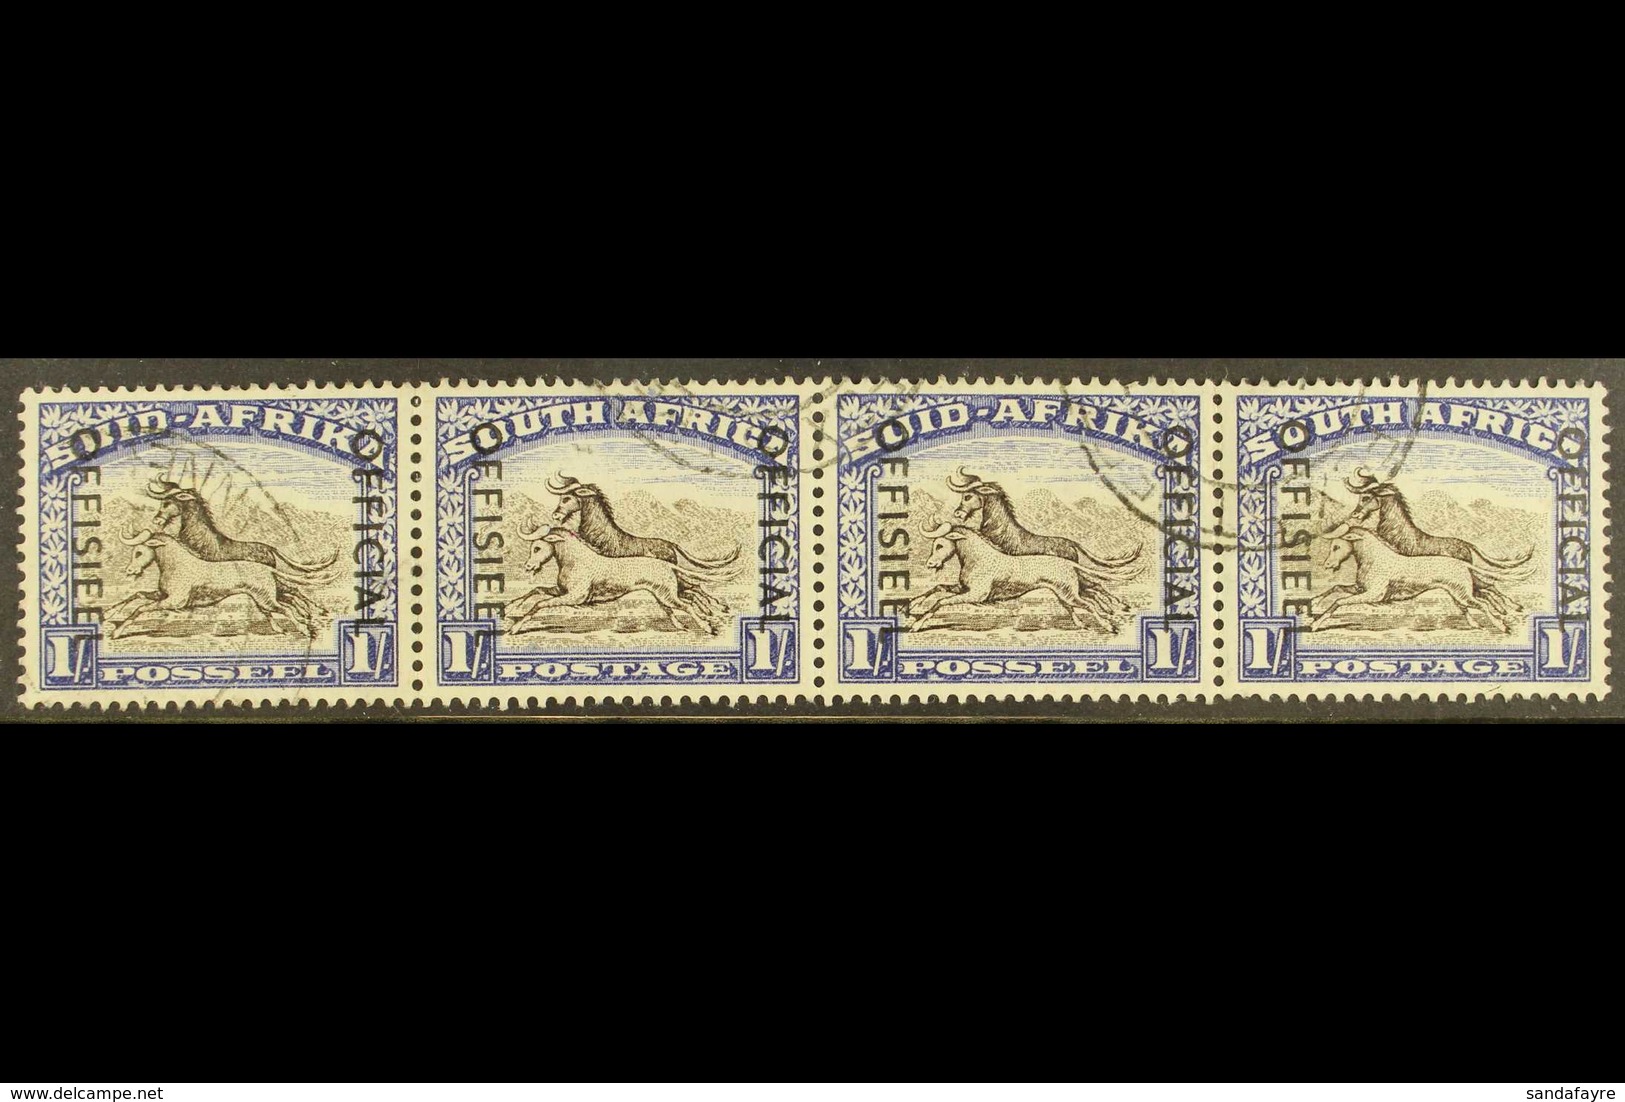 OFFICIALS 1950-54 1s Blackish Brown & Ultramarine Overprint, SG O47a, Fine Cds Used Horizontal STRIP Of 4, Fresh & Very  - Unclassified